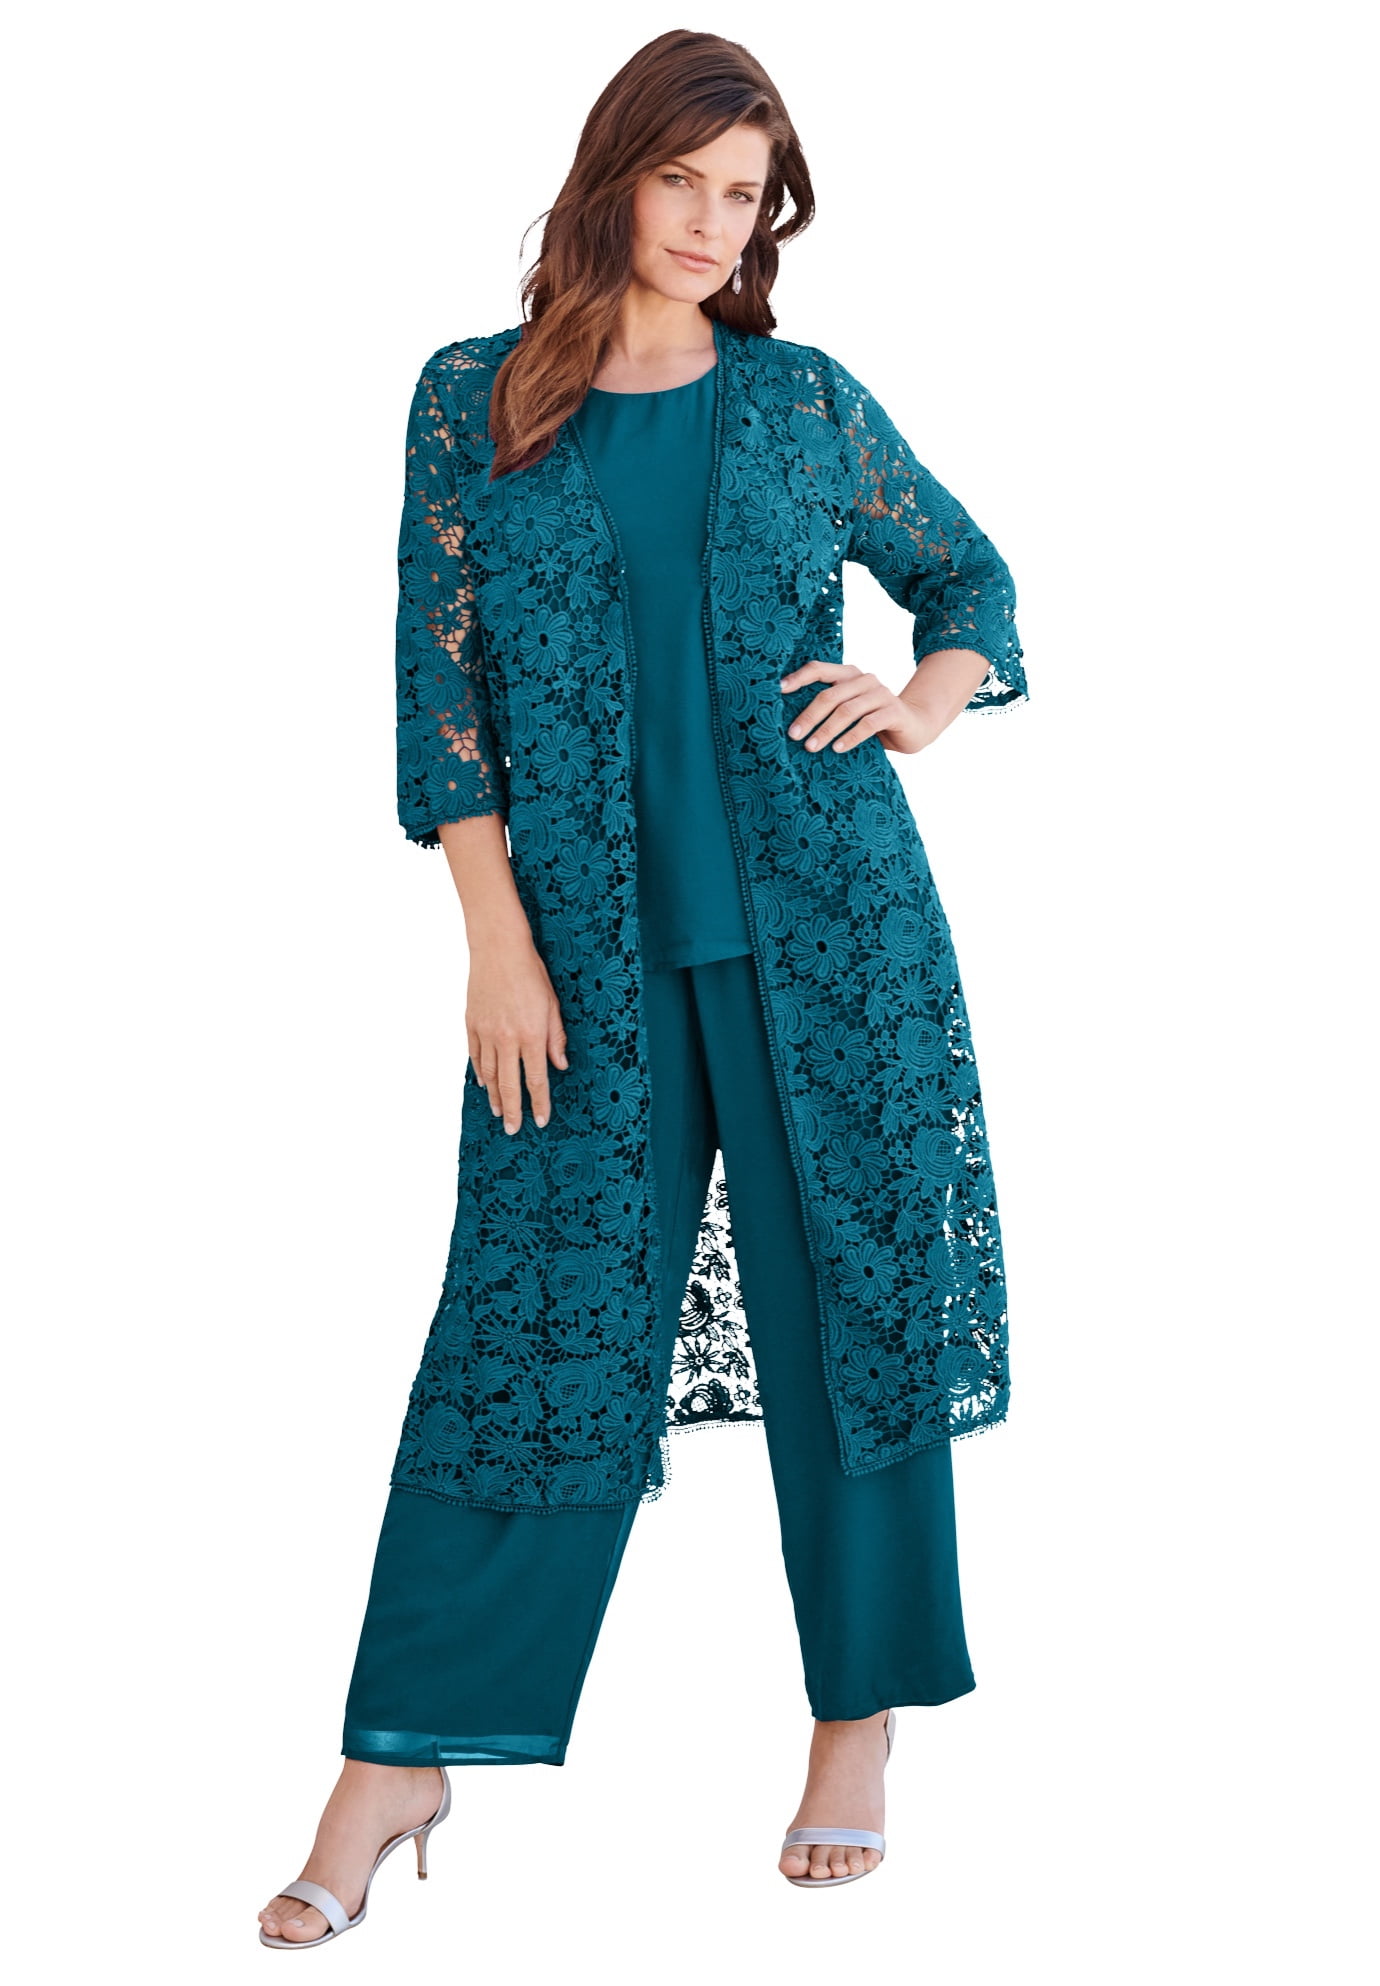 Roaman's Women's Plus Size Three-Piece Lace Duster & Pant Suit Formal  Evening Wear Set, Mother Of The Bride Outfit 